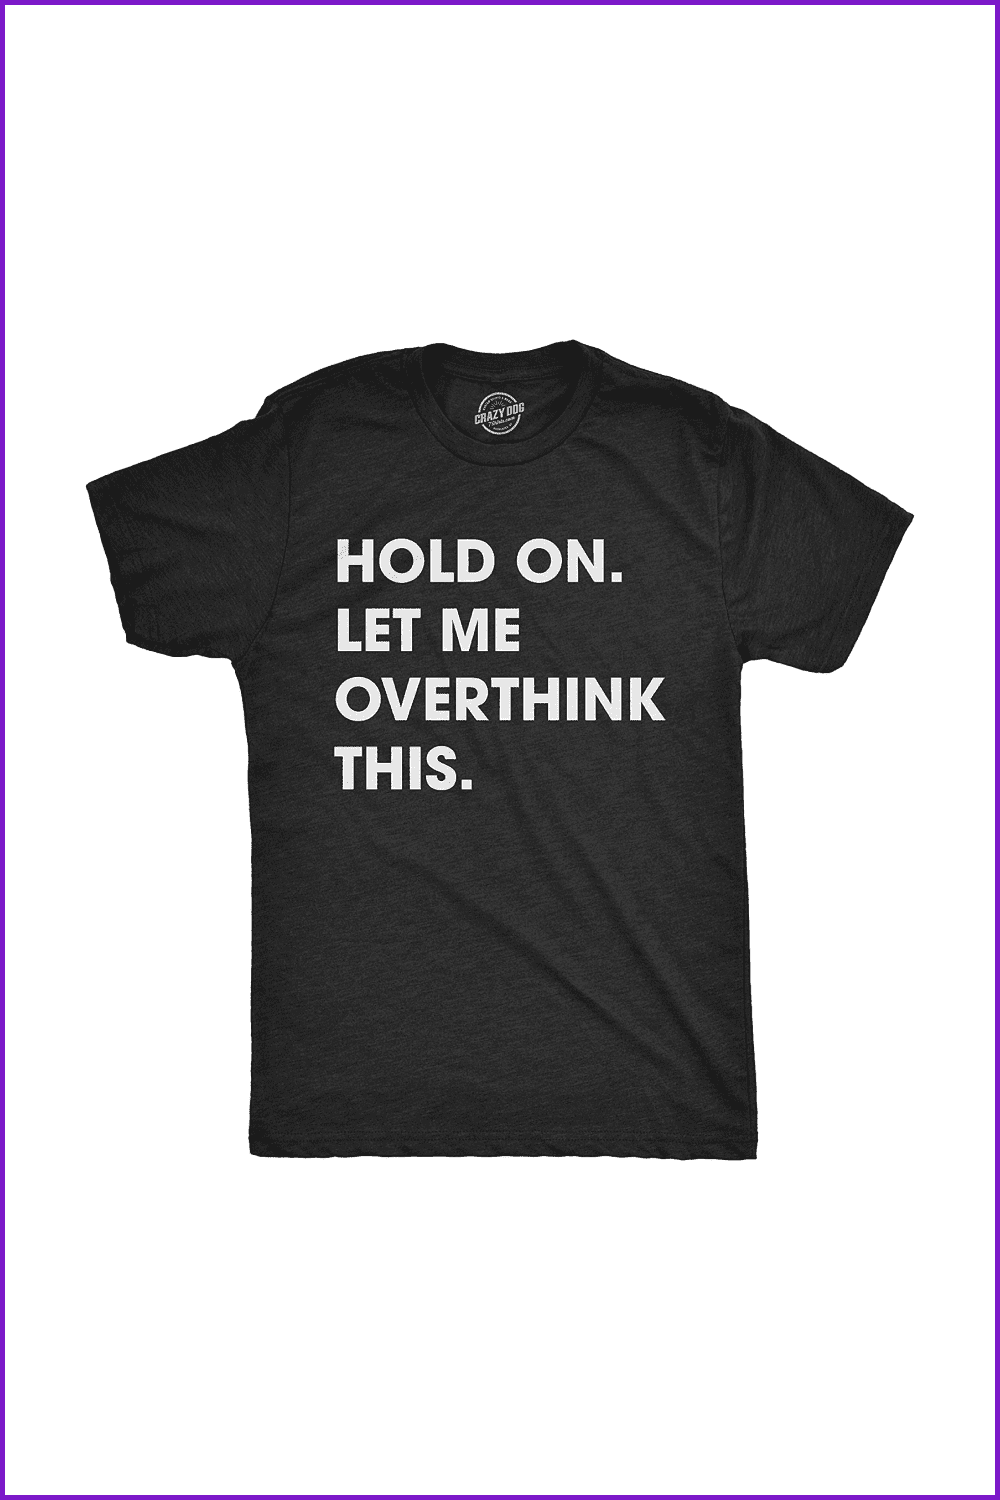 Crazy Dog T-Shirts Mens Hold On Let Me Overthink This T Shirt Funny Sarcastic Hilarious Adult Tee.